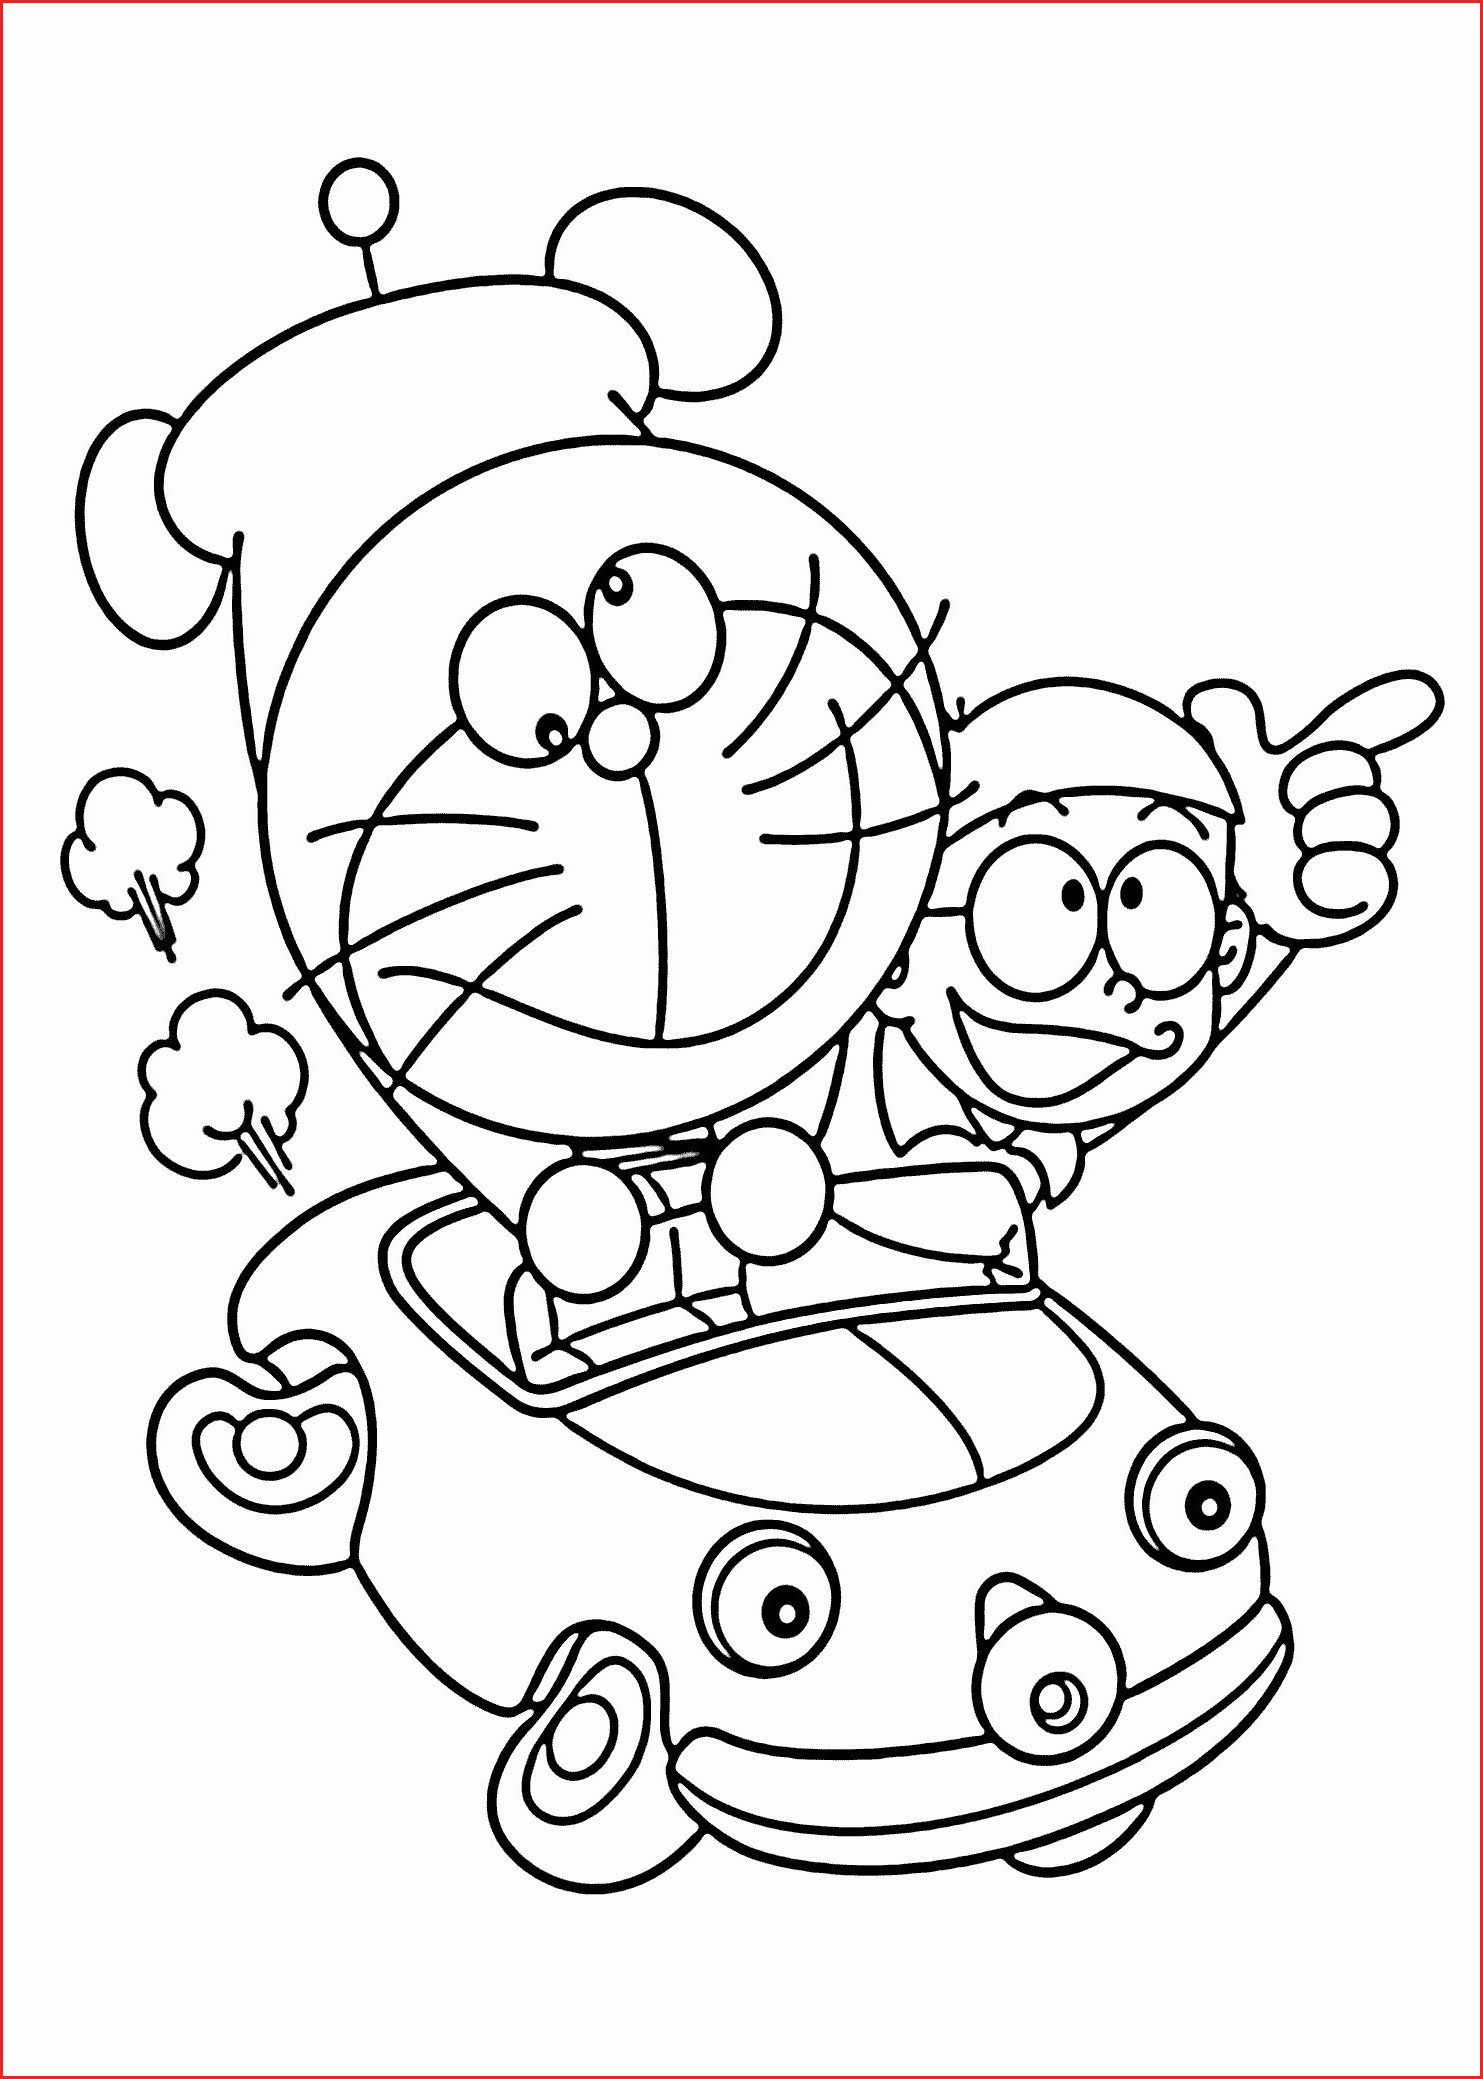 dad coloring page to print beautiful gallery farm coloring pages animal farm awesome printable coloring of dad coloring page to print